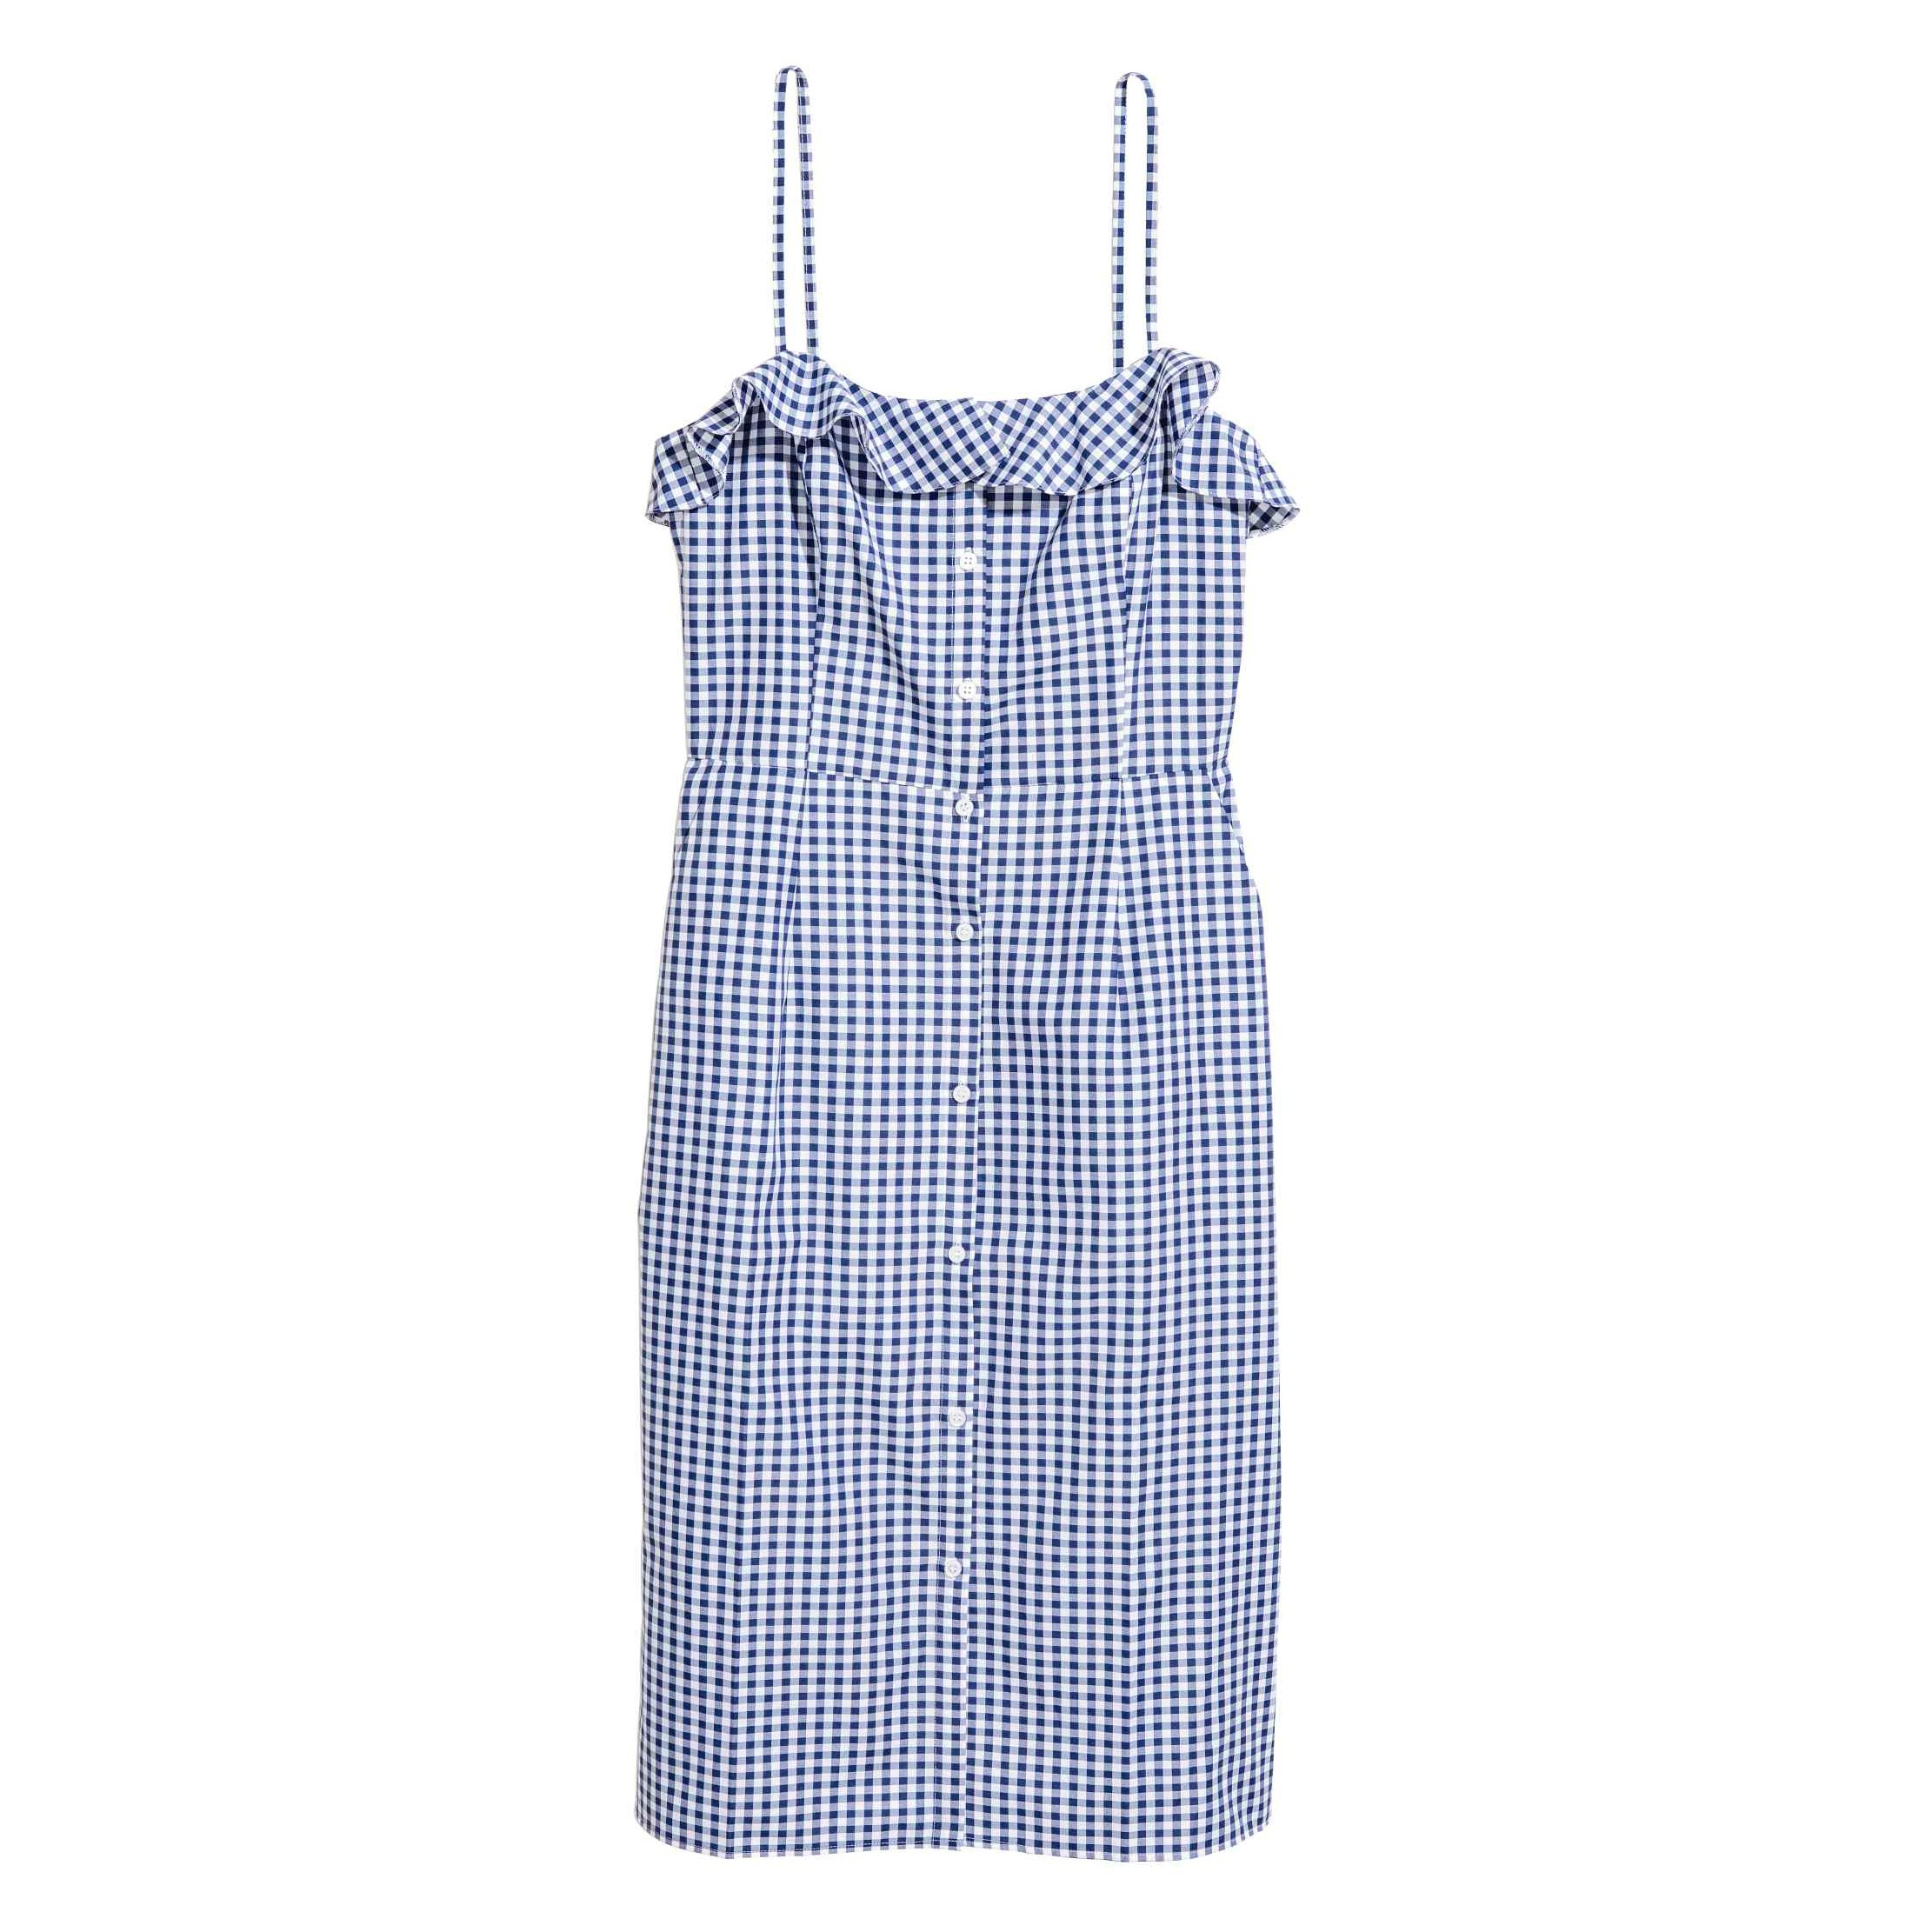 h and m gingham dress